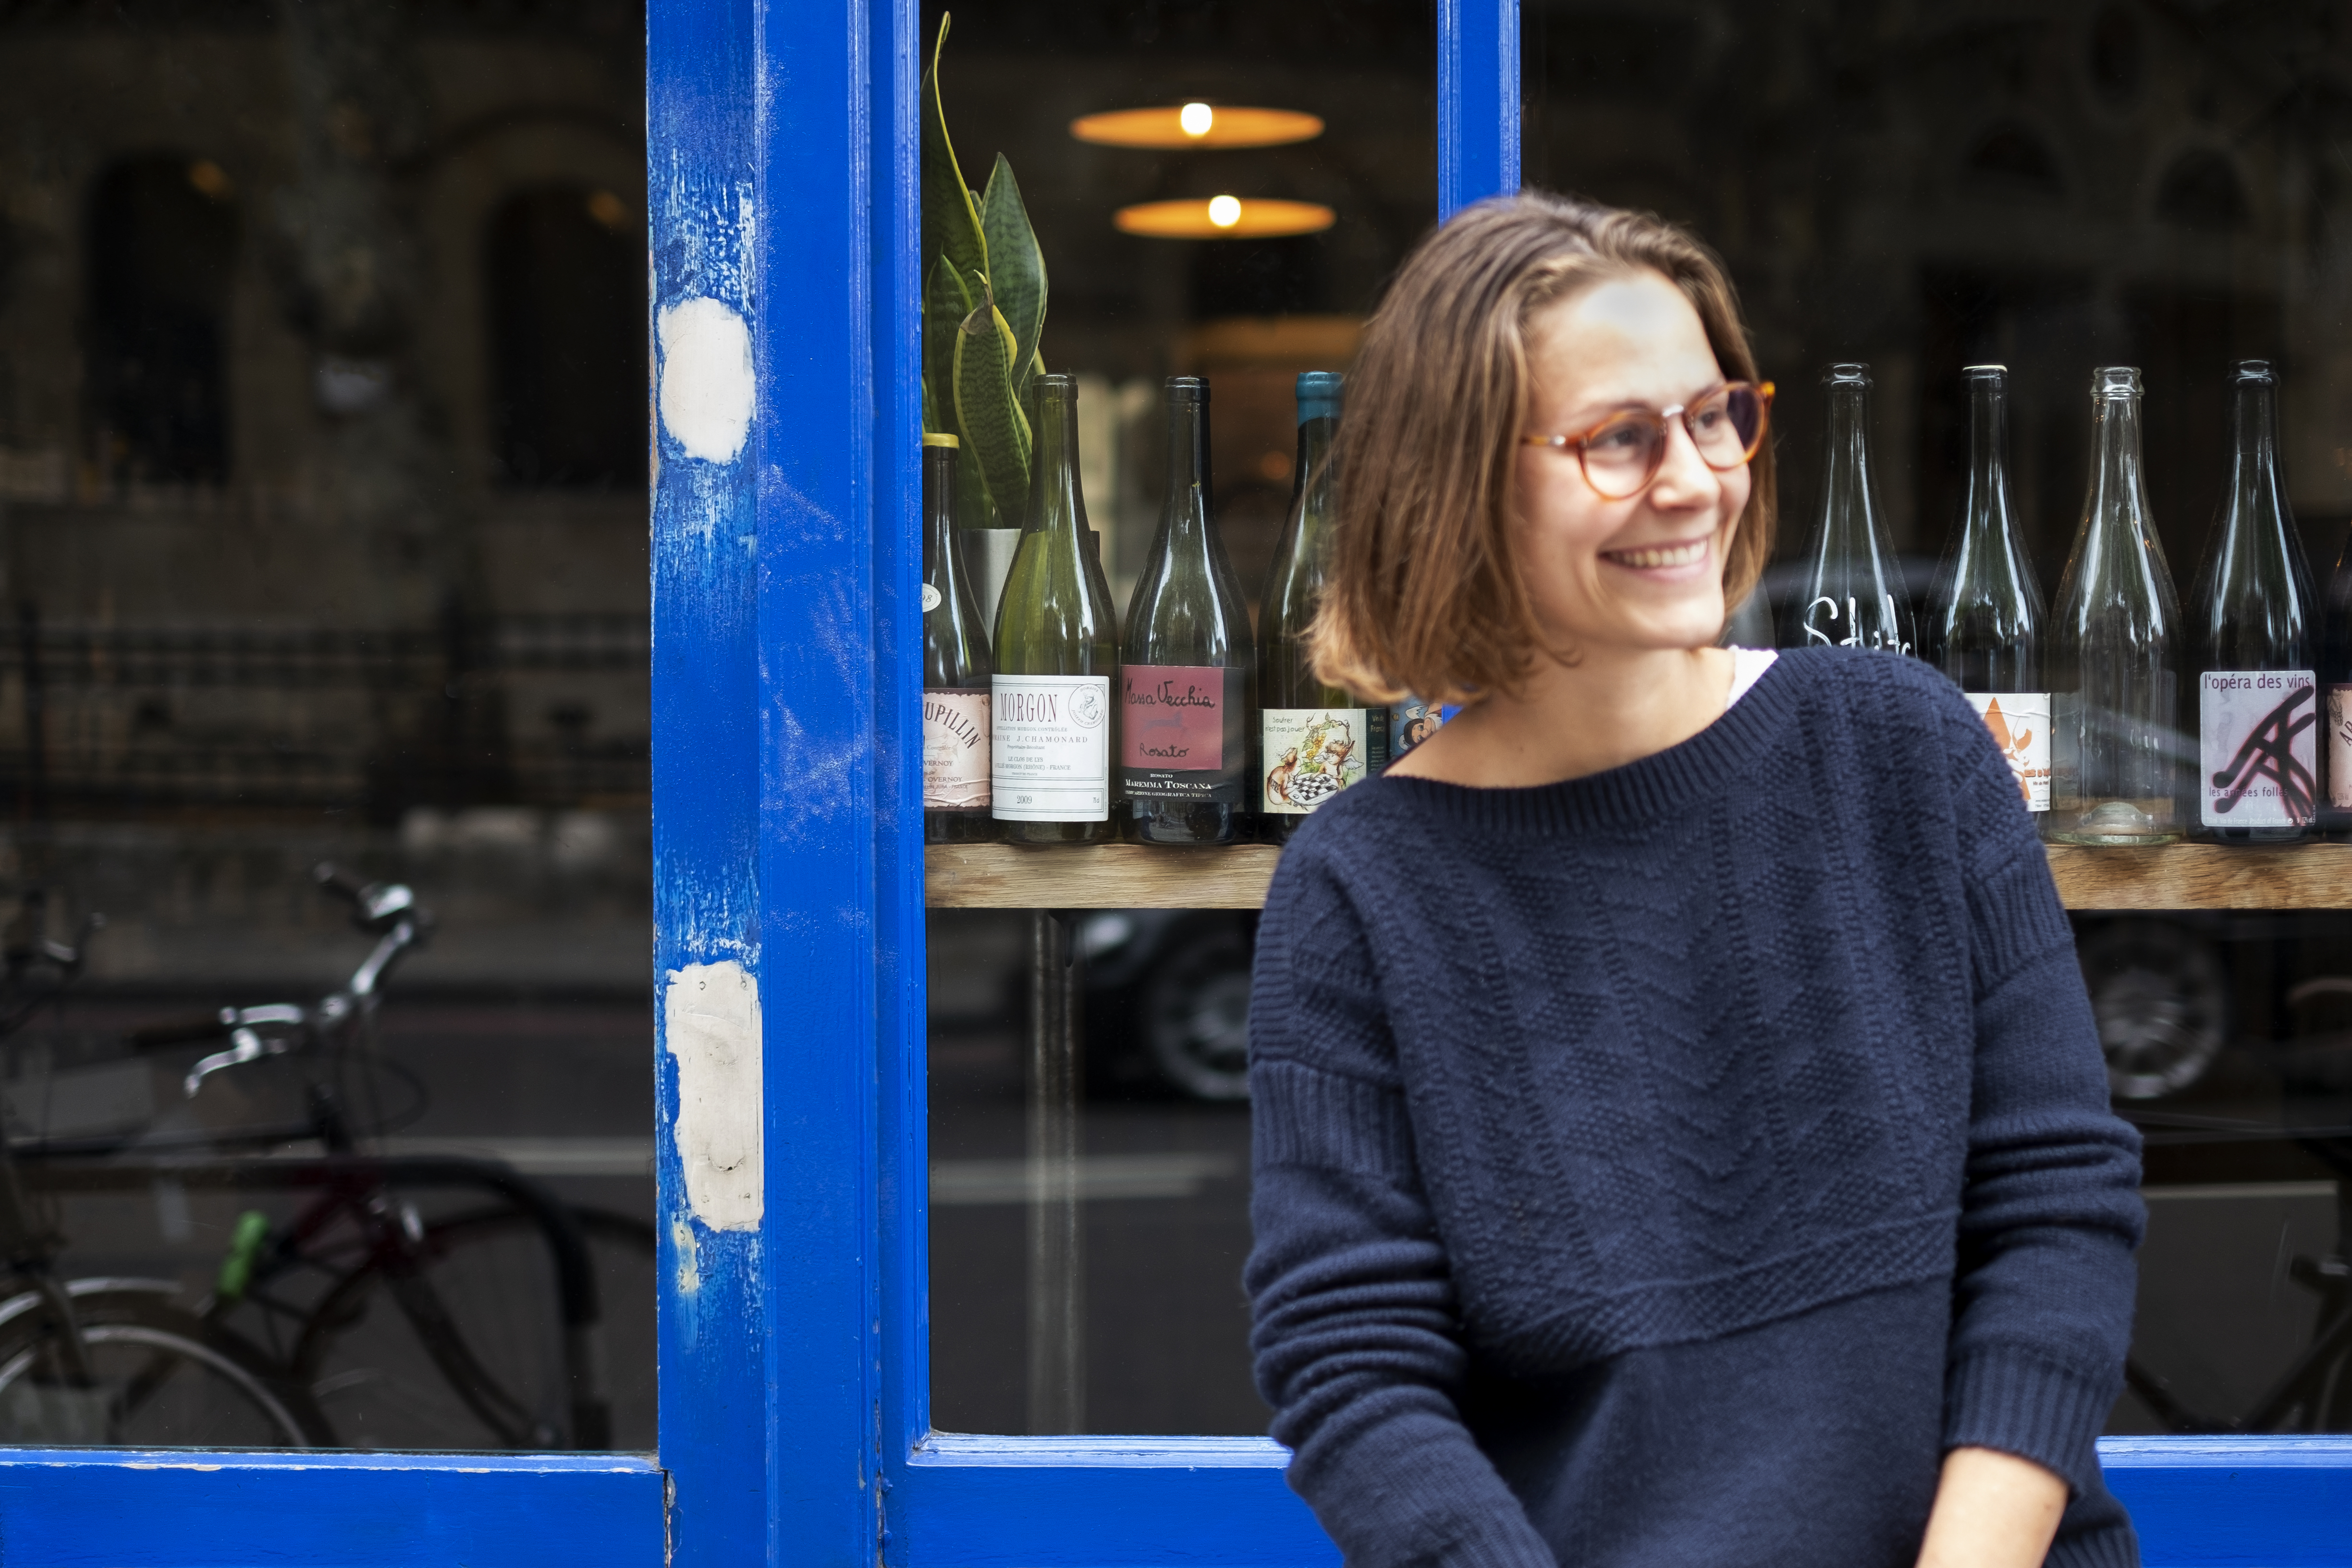 Chef Anna Tobias — alum of The River Cafe and Rochelle Canteen — outside Lower Clapton wine bar and restaurant P. Franco, that forms part of the best 24 hour restaurant travel itinerary for London — where to eat with one day in the city